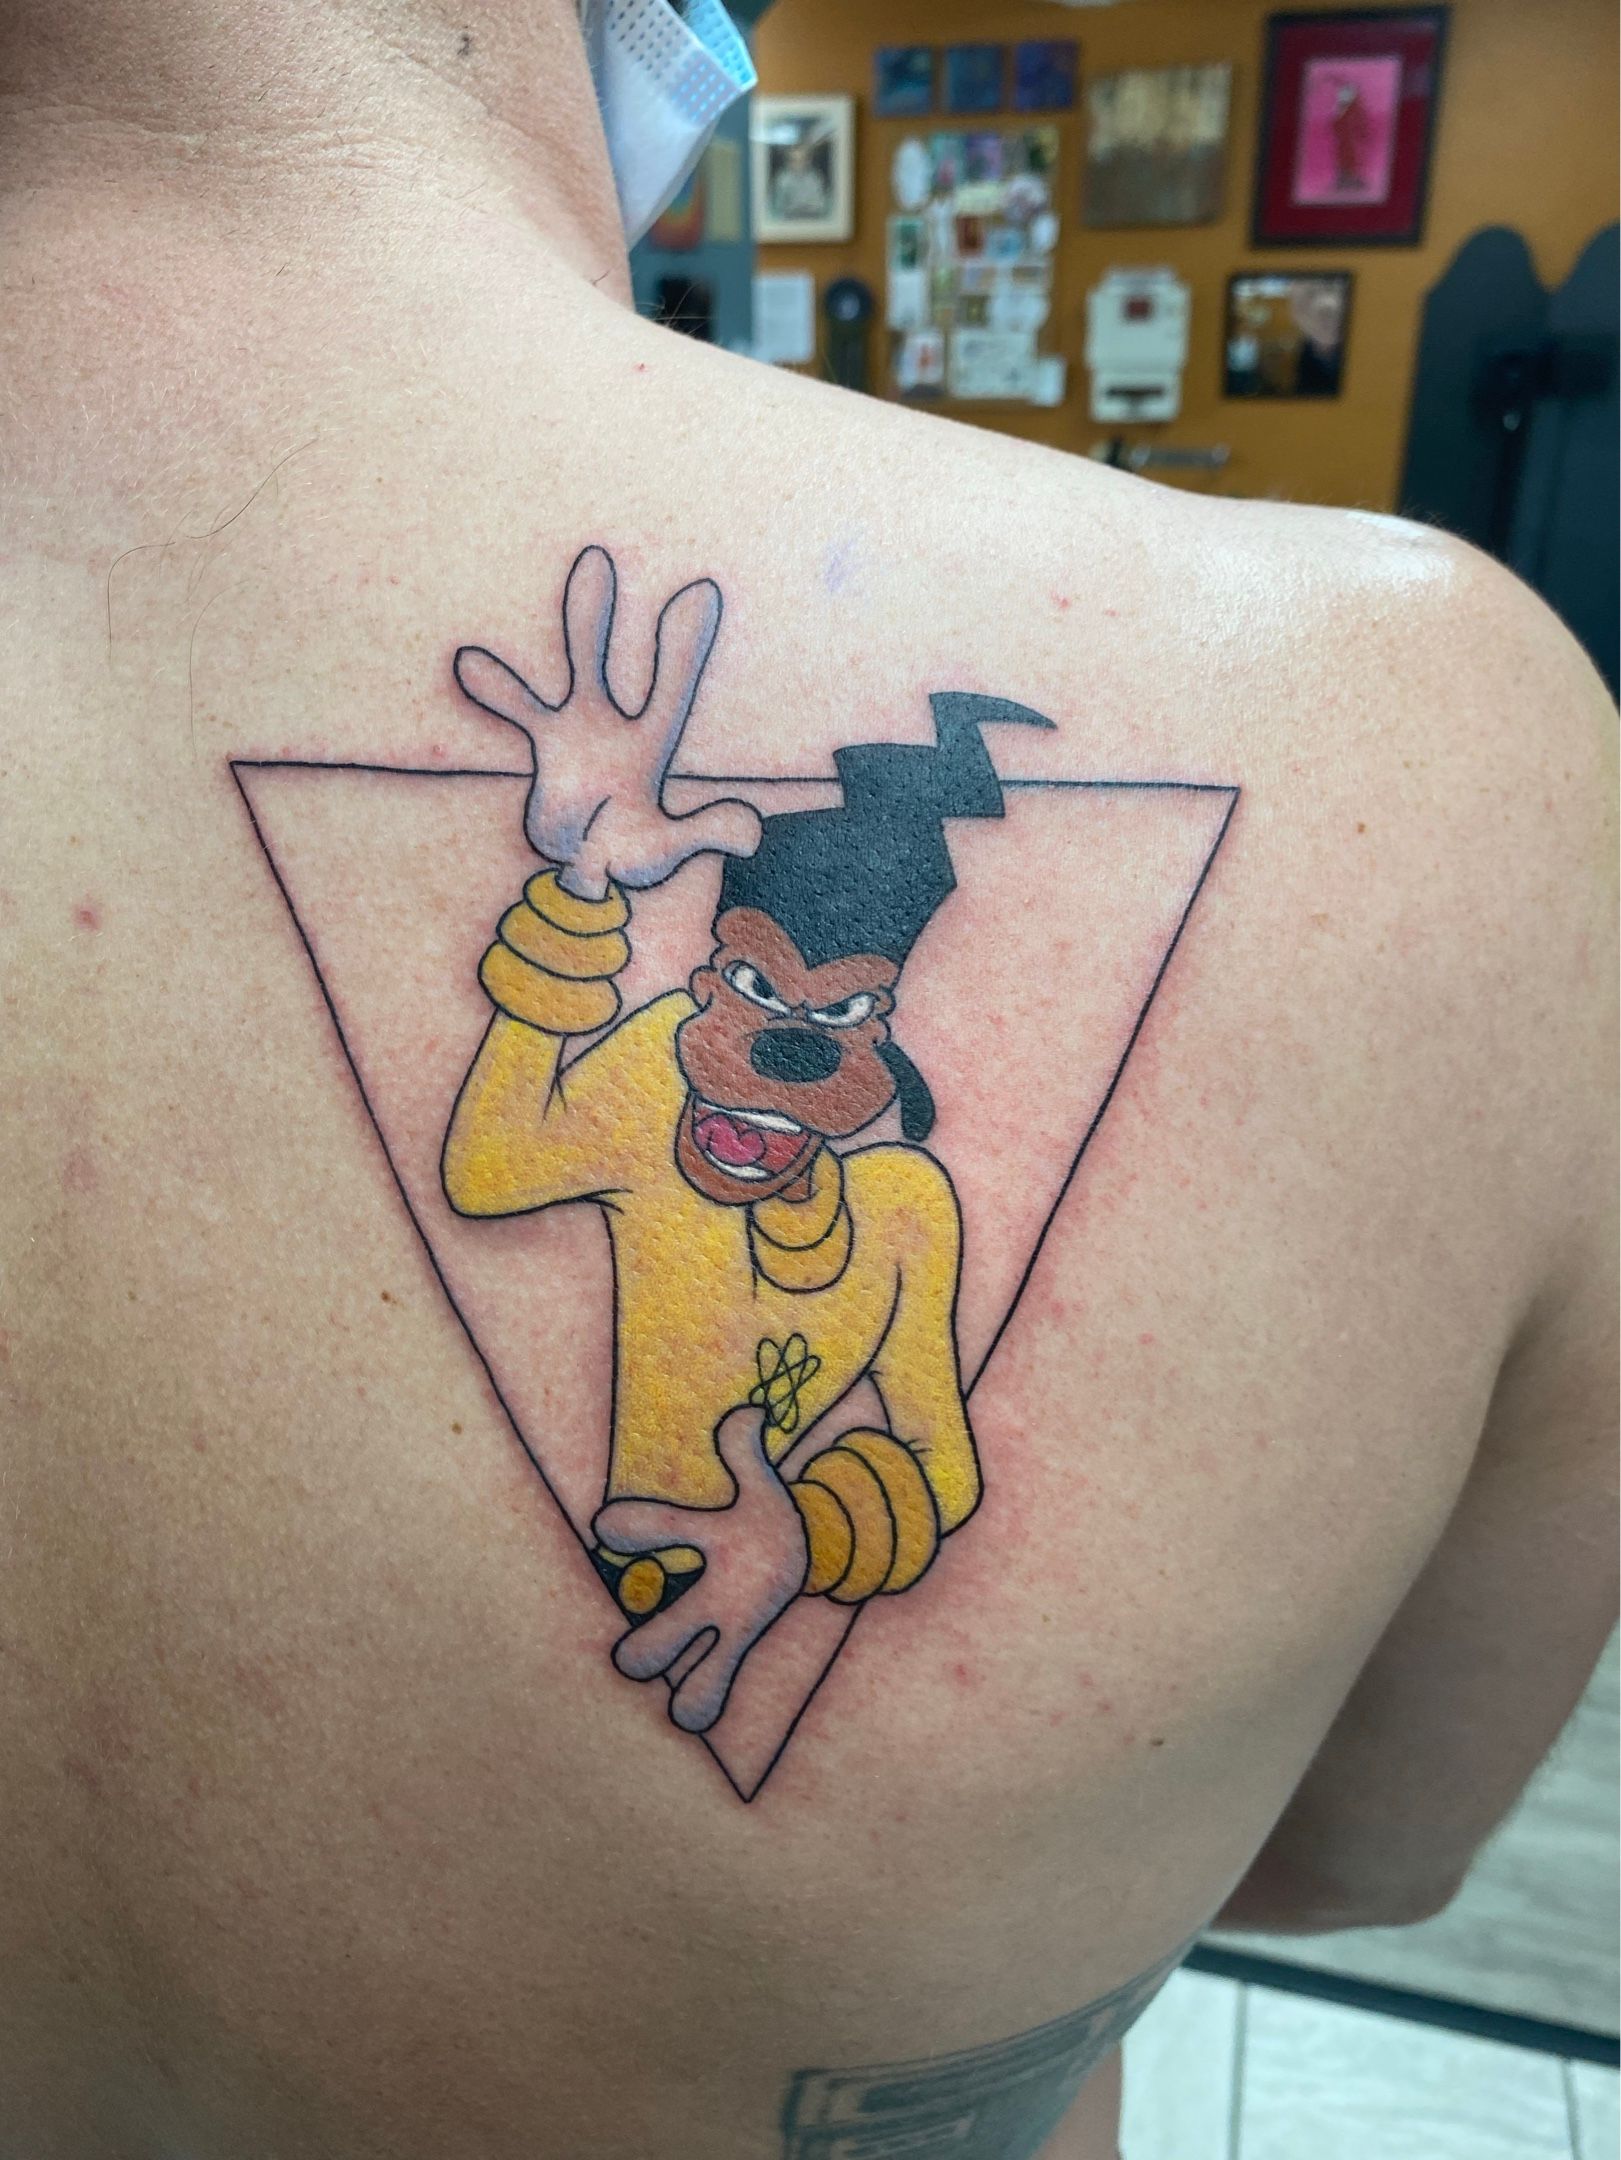 Max from a goofy movie by findyoursmile at Arlia Tattoo in Orlando FL  r disney